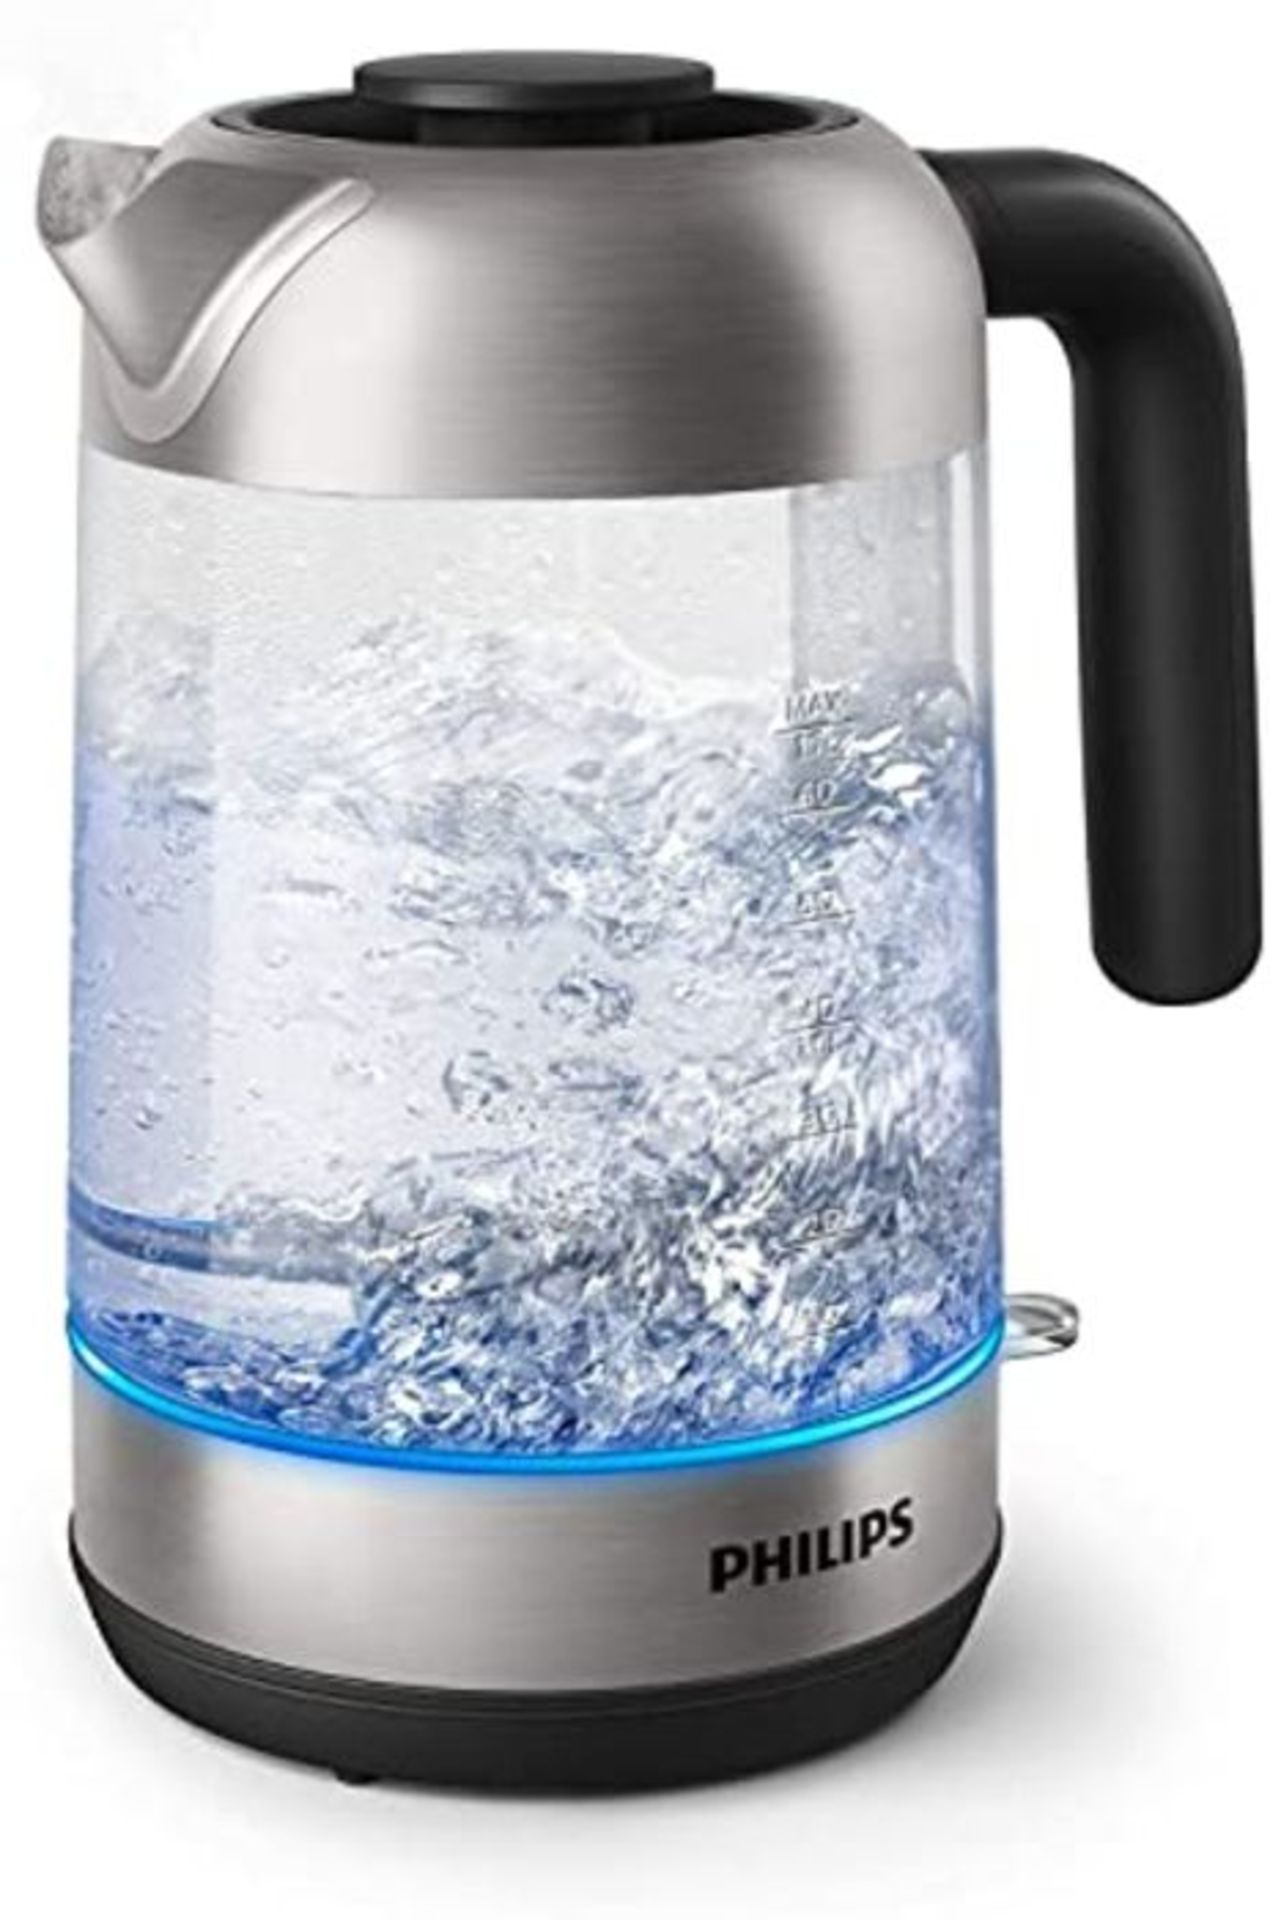 RRP £54.00 Philips Electric Kettle - 1.7L Capacity with Spring Lid and Indicator Light, Glass, Pi